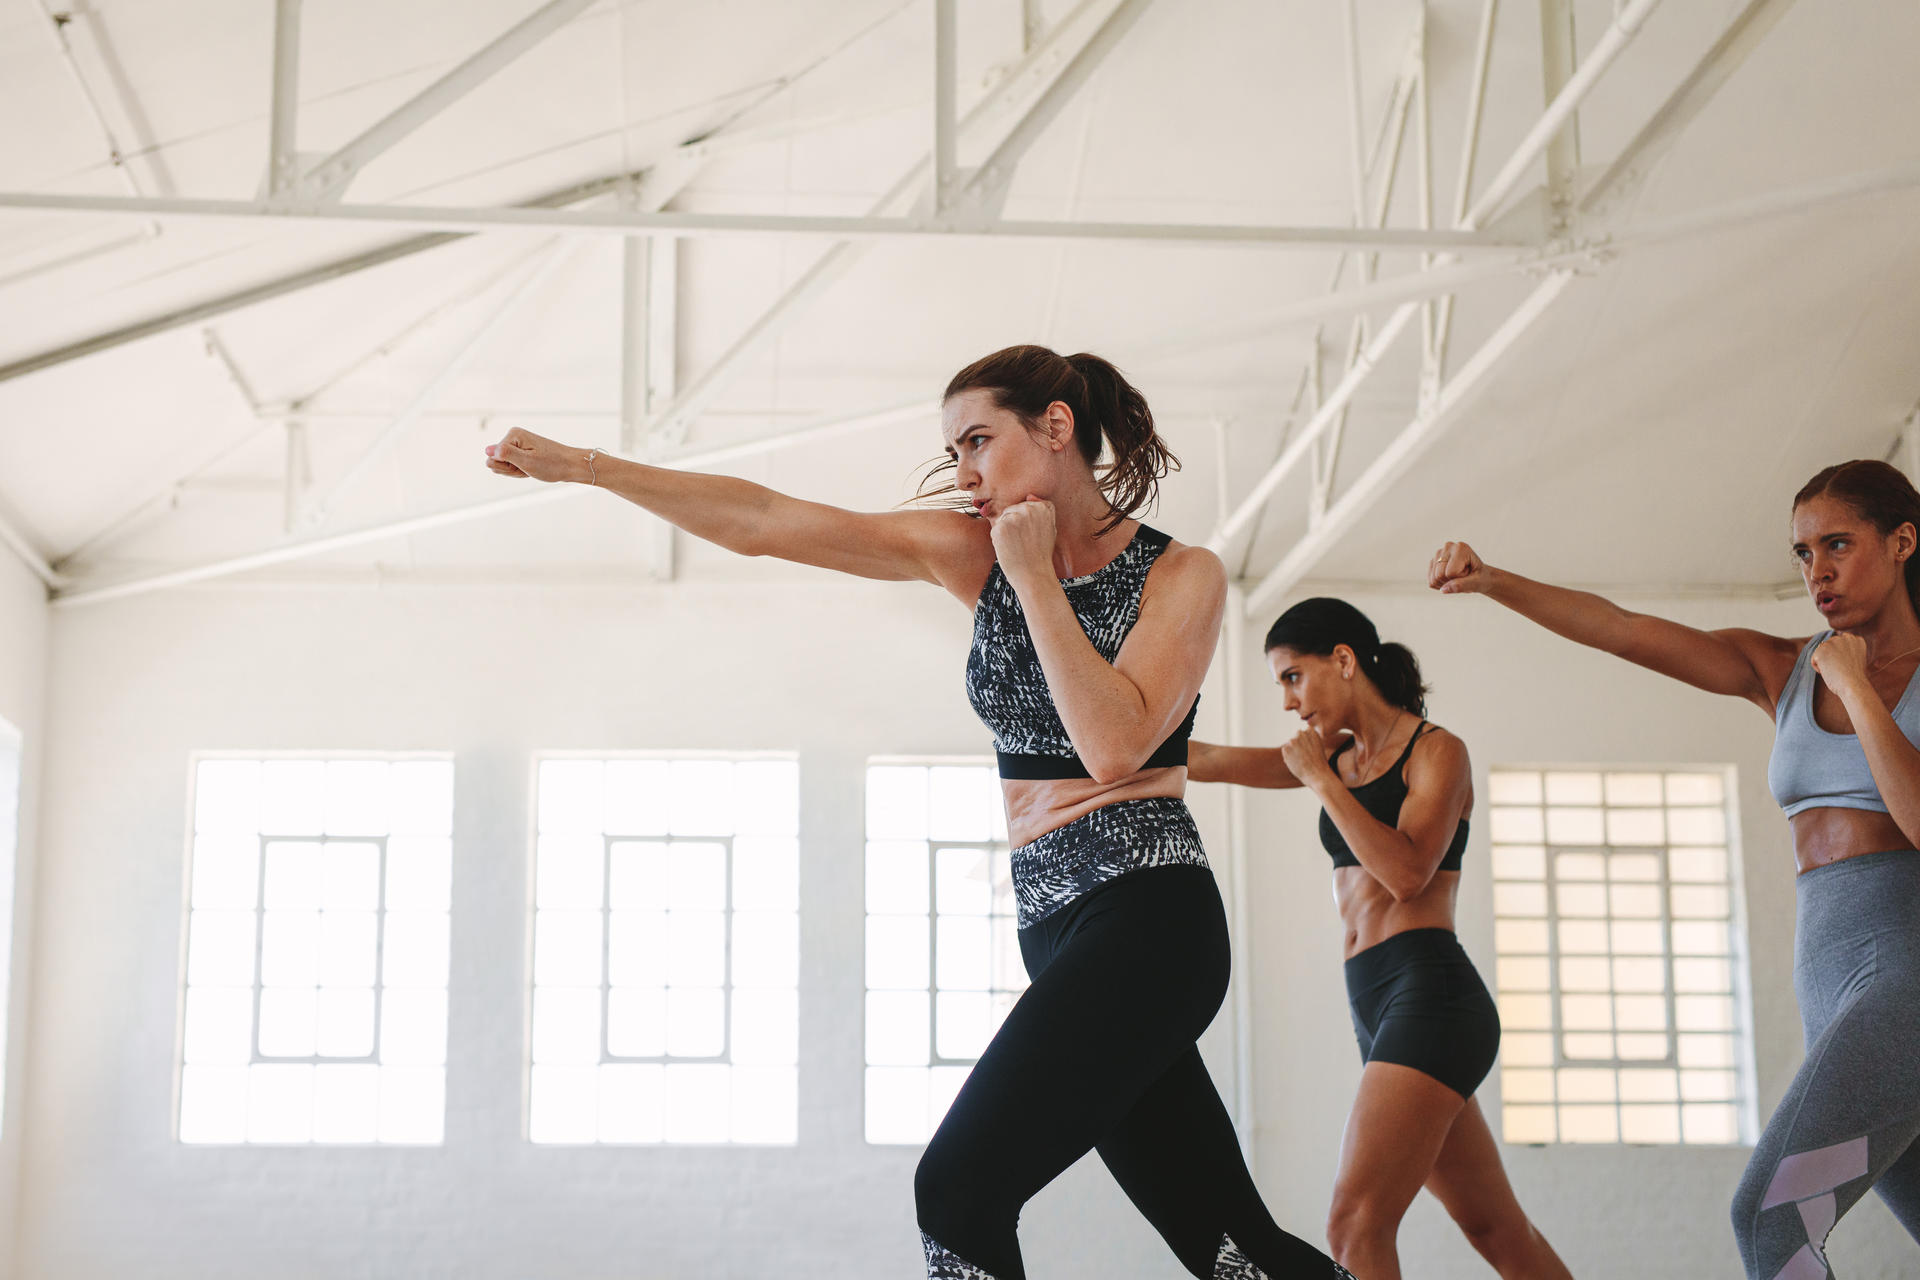 11 Boxing Class Ideas to Supercharge Your Sessions